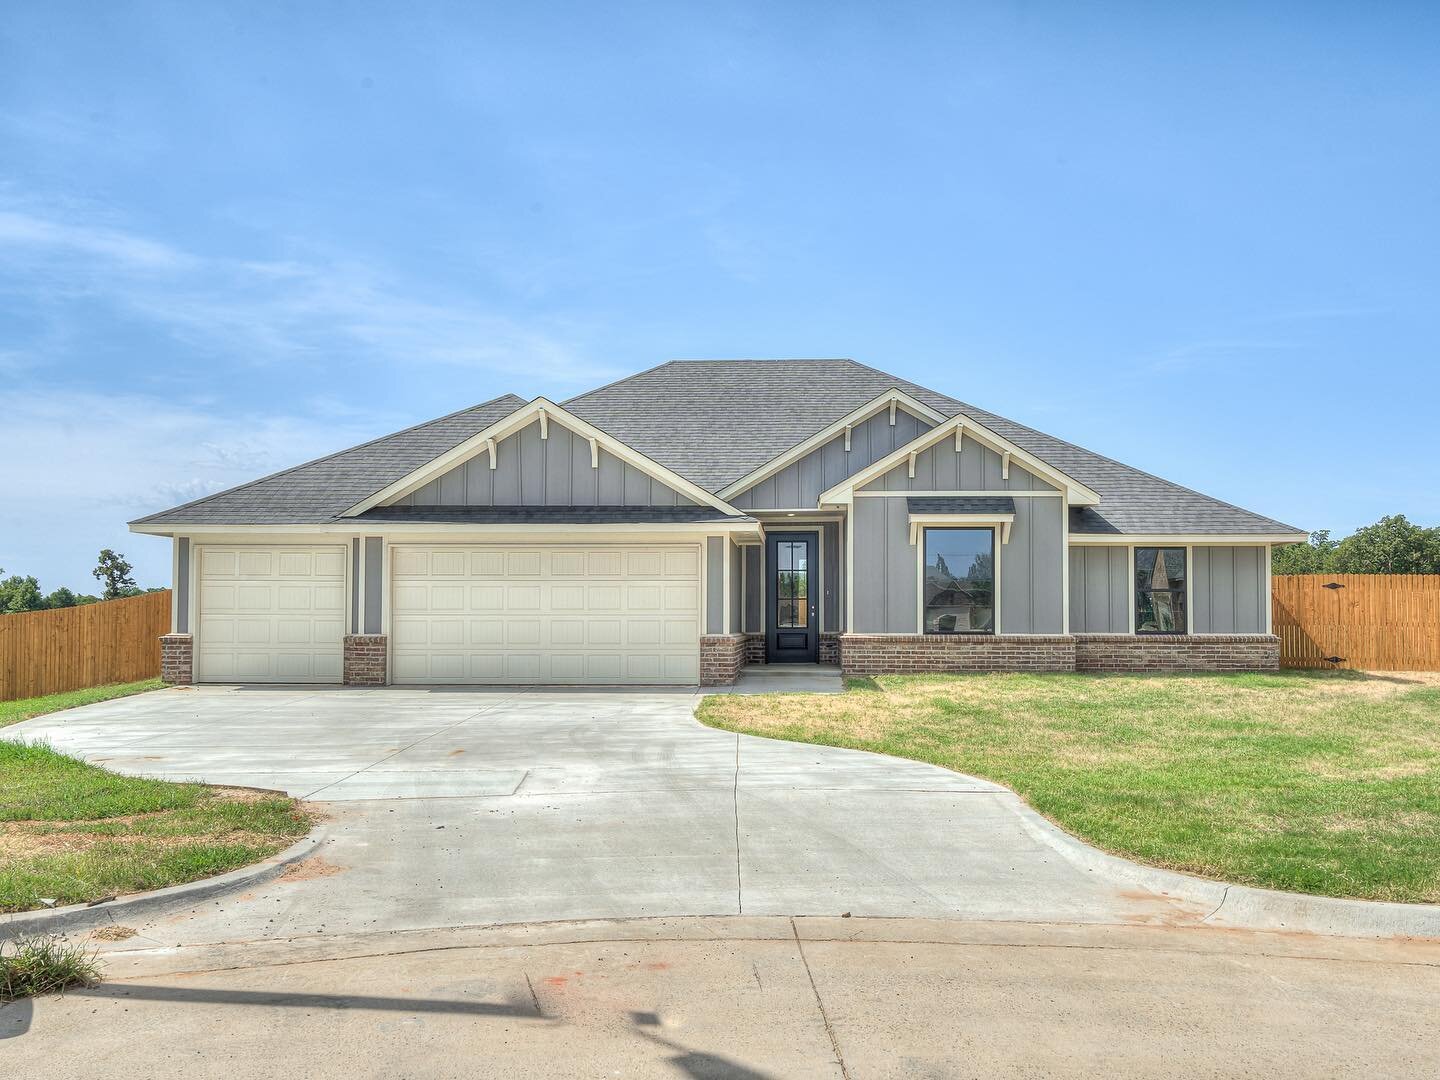 New home available in the desired Brush Creek Community 

907 Oak Tree Ct.
Harrah, OK

3 bedroom / 2 bathroom /  3 car garage with study

2,250 sq ft with a large backyard

Listed at $349,900

Contact Berry Sheffield for more information or to schedu